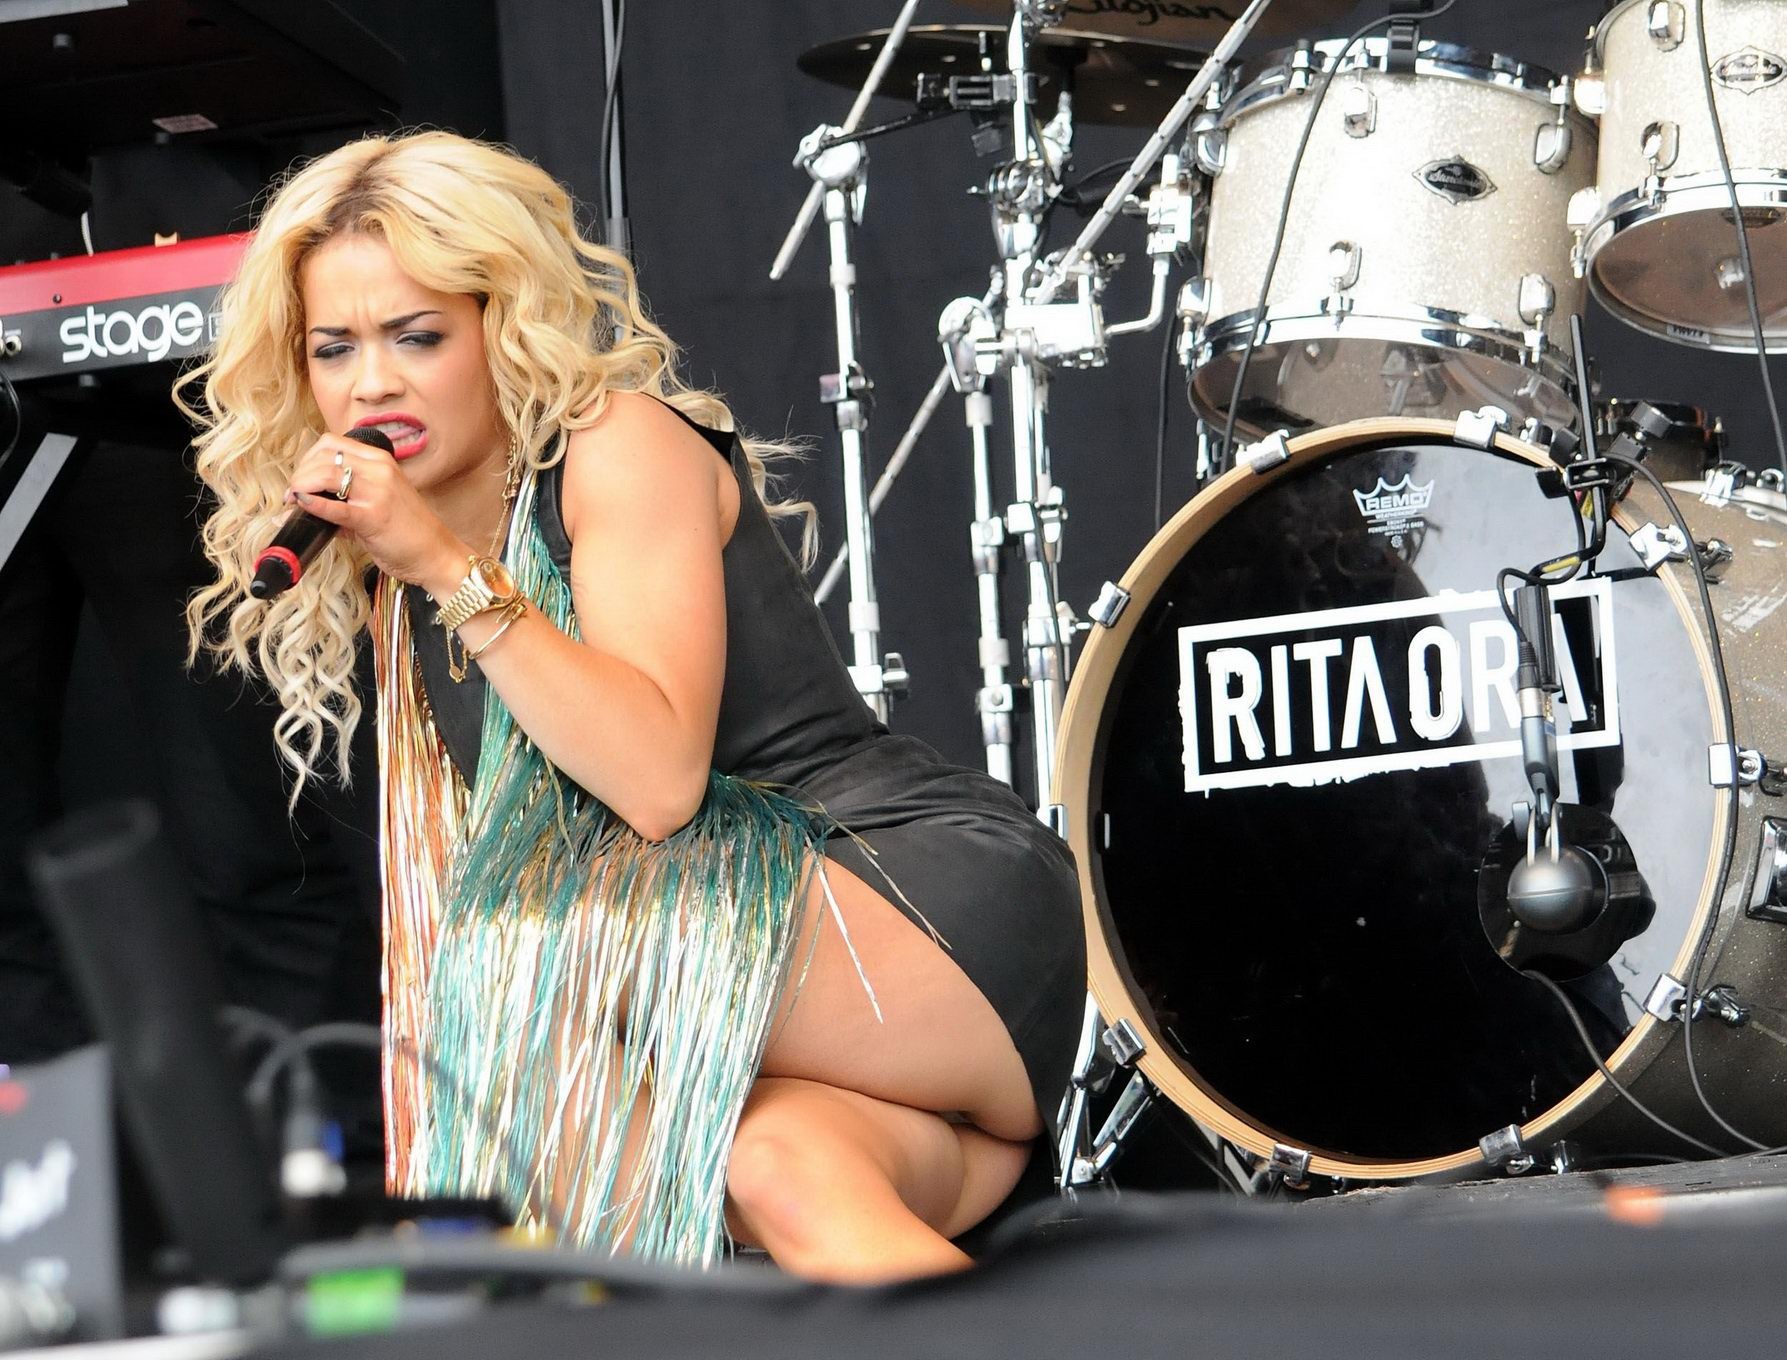 Rita Ora upskirt while performing at 'T in the Park #75257699